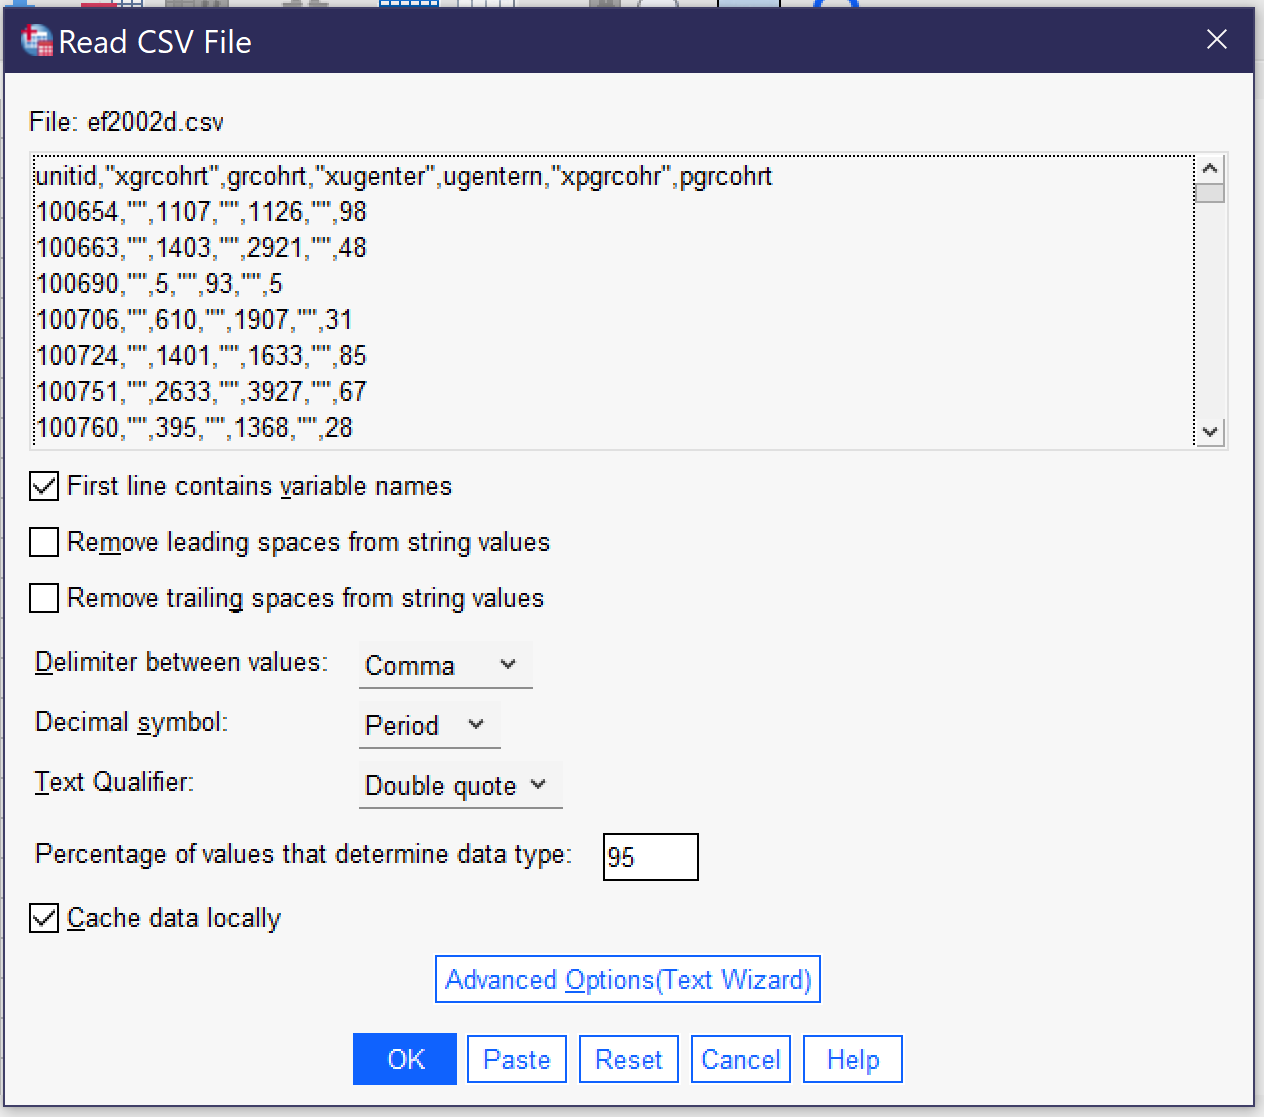 A screenshot of the import CSV popup. Alt+v toggles whether the first line contains variable names; Alt+M whether to remove leading spaces from string variables; Alt+G for removing trailing spaces from string variables; Alt+D to indicate whether the delimiter between values is a comma, semicolon, or tab; Alt+S to indicate whether the decimal symbol is a period or comma; Alt+T to indicate whether the text qualifier is a double quote, single quote, or none; and Alt+C for whether to cache data locally. Alt+O opens a text wizard which will be discussed under importing text.